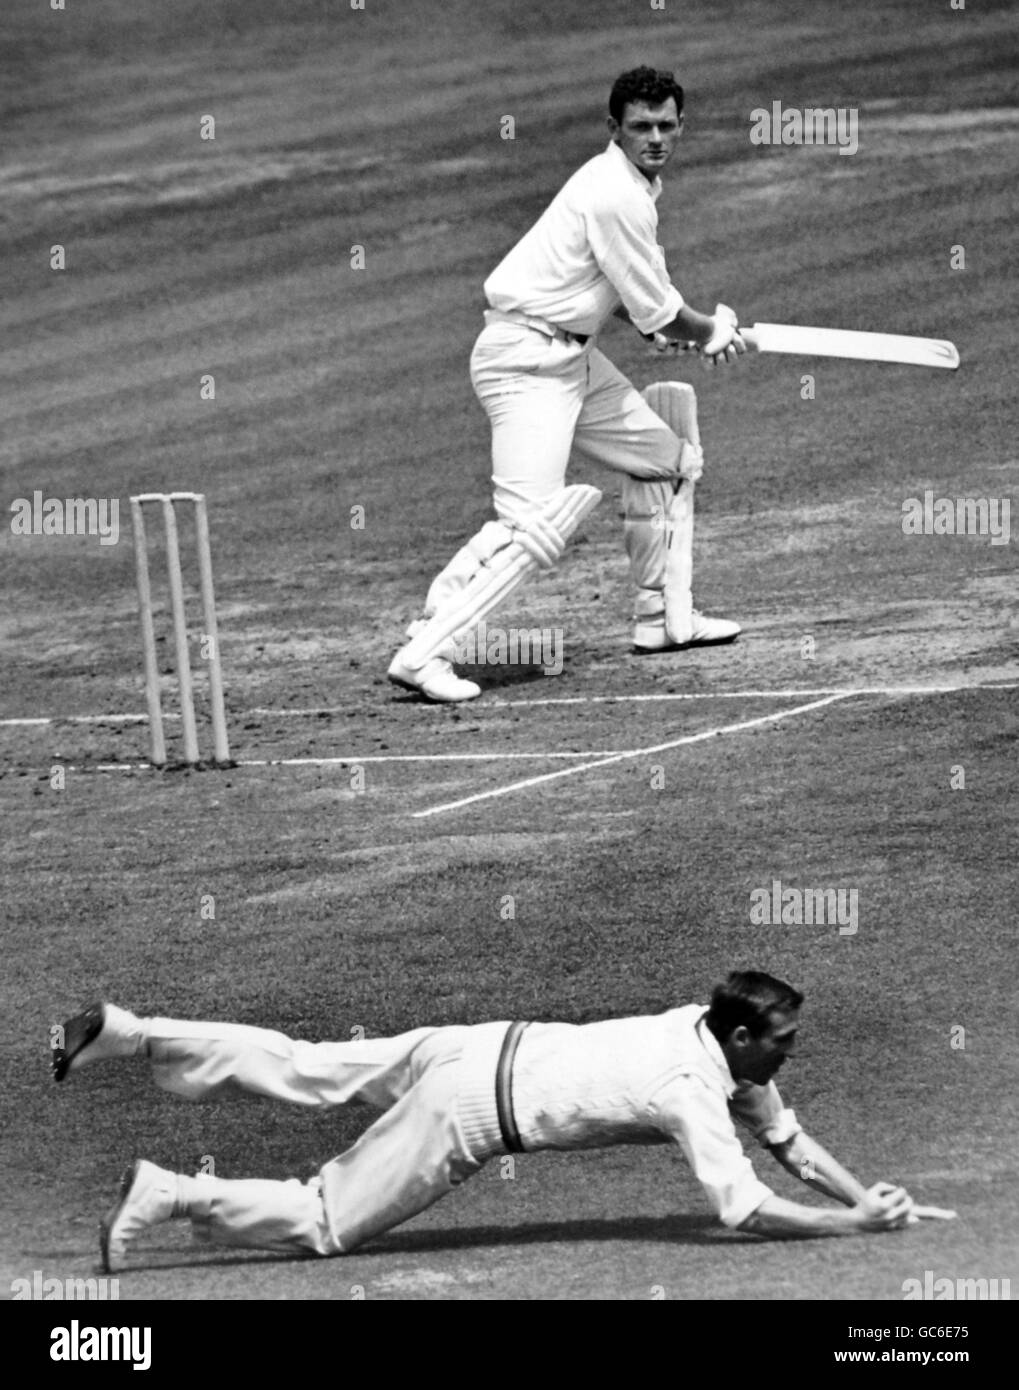 Cricket - Middlesex v Northamptonshire County Championship 1966 - Venue Lord's Cricket Ground, St John's Wood. R.M.Prideaux of Northants cuts a ball from R.W.Hooker of Middlesex but Parfitt goes full length to stop it. Stock Photo